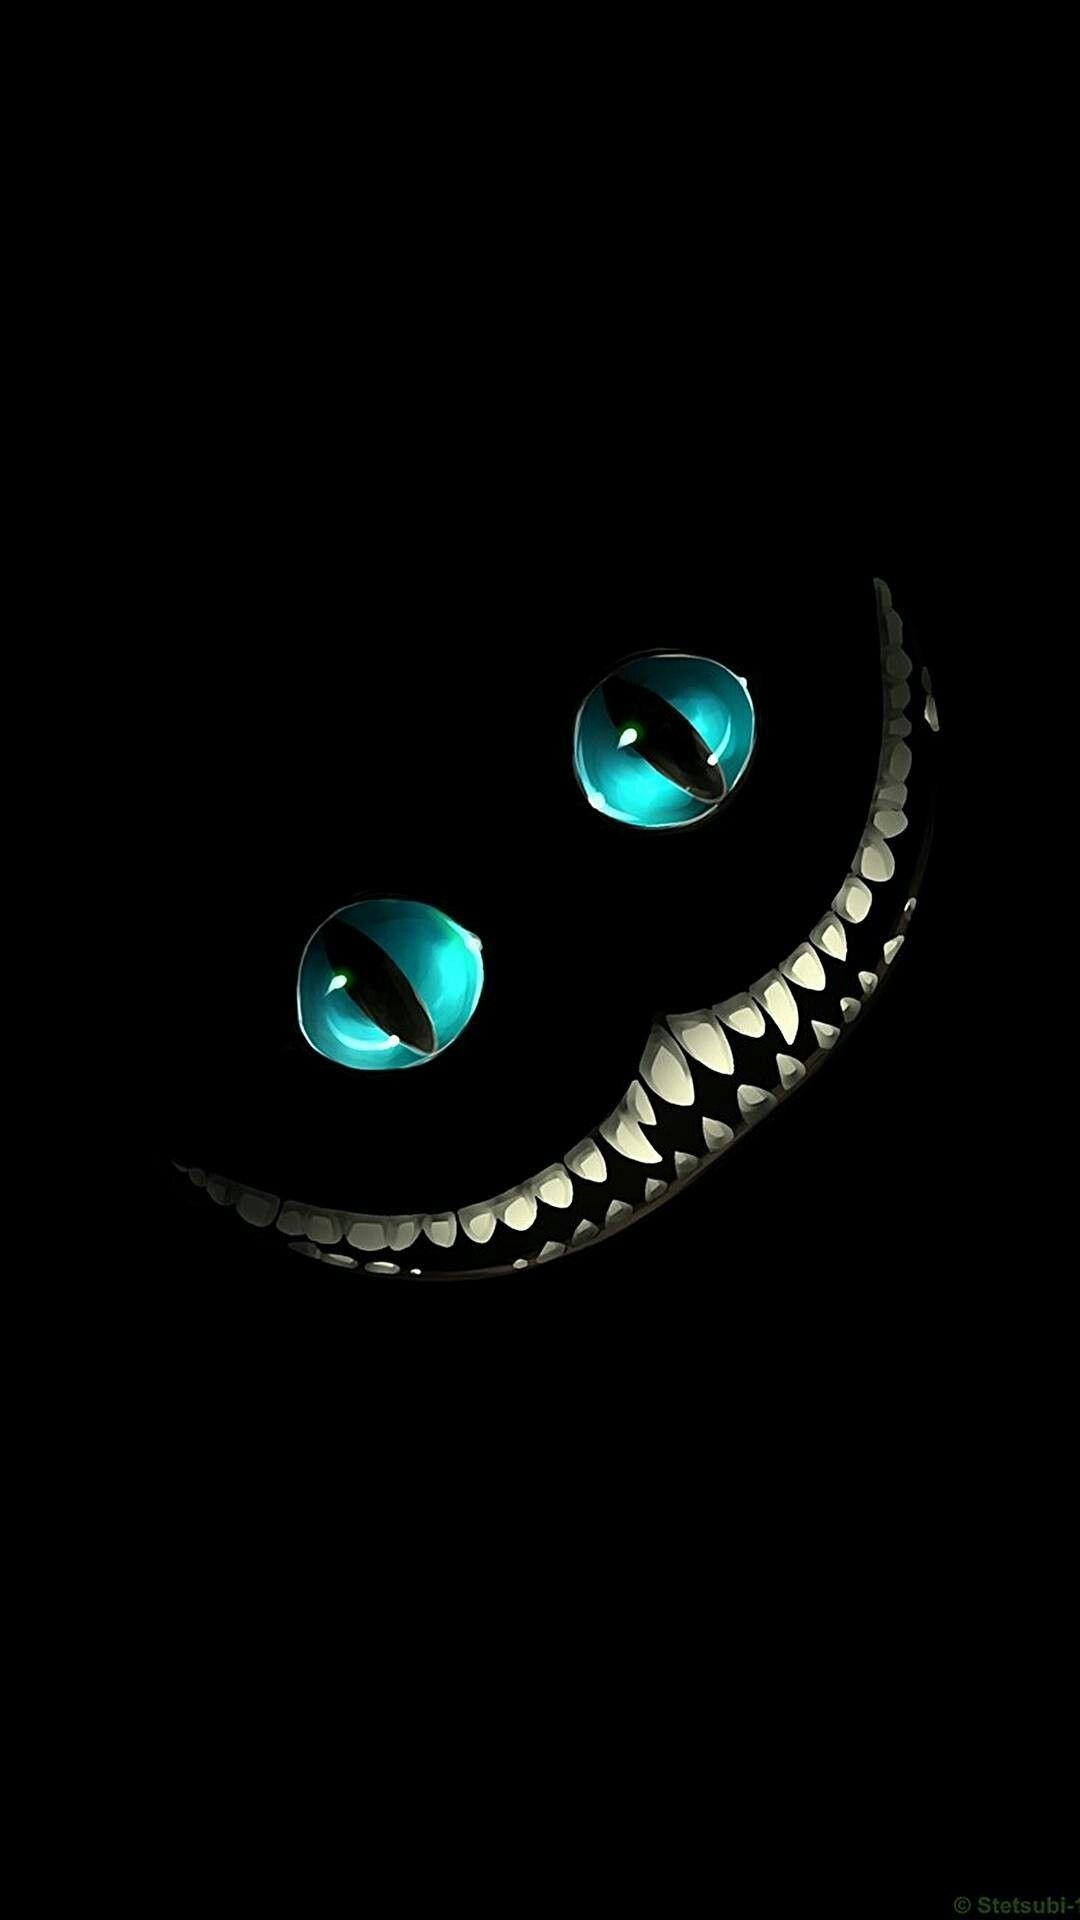 Cheshire Cat: A creature with an enormous grin encountered by Alice in Alice's Adventures in Wonderland. 1080x1920 Full HD Wallpaper.